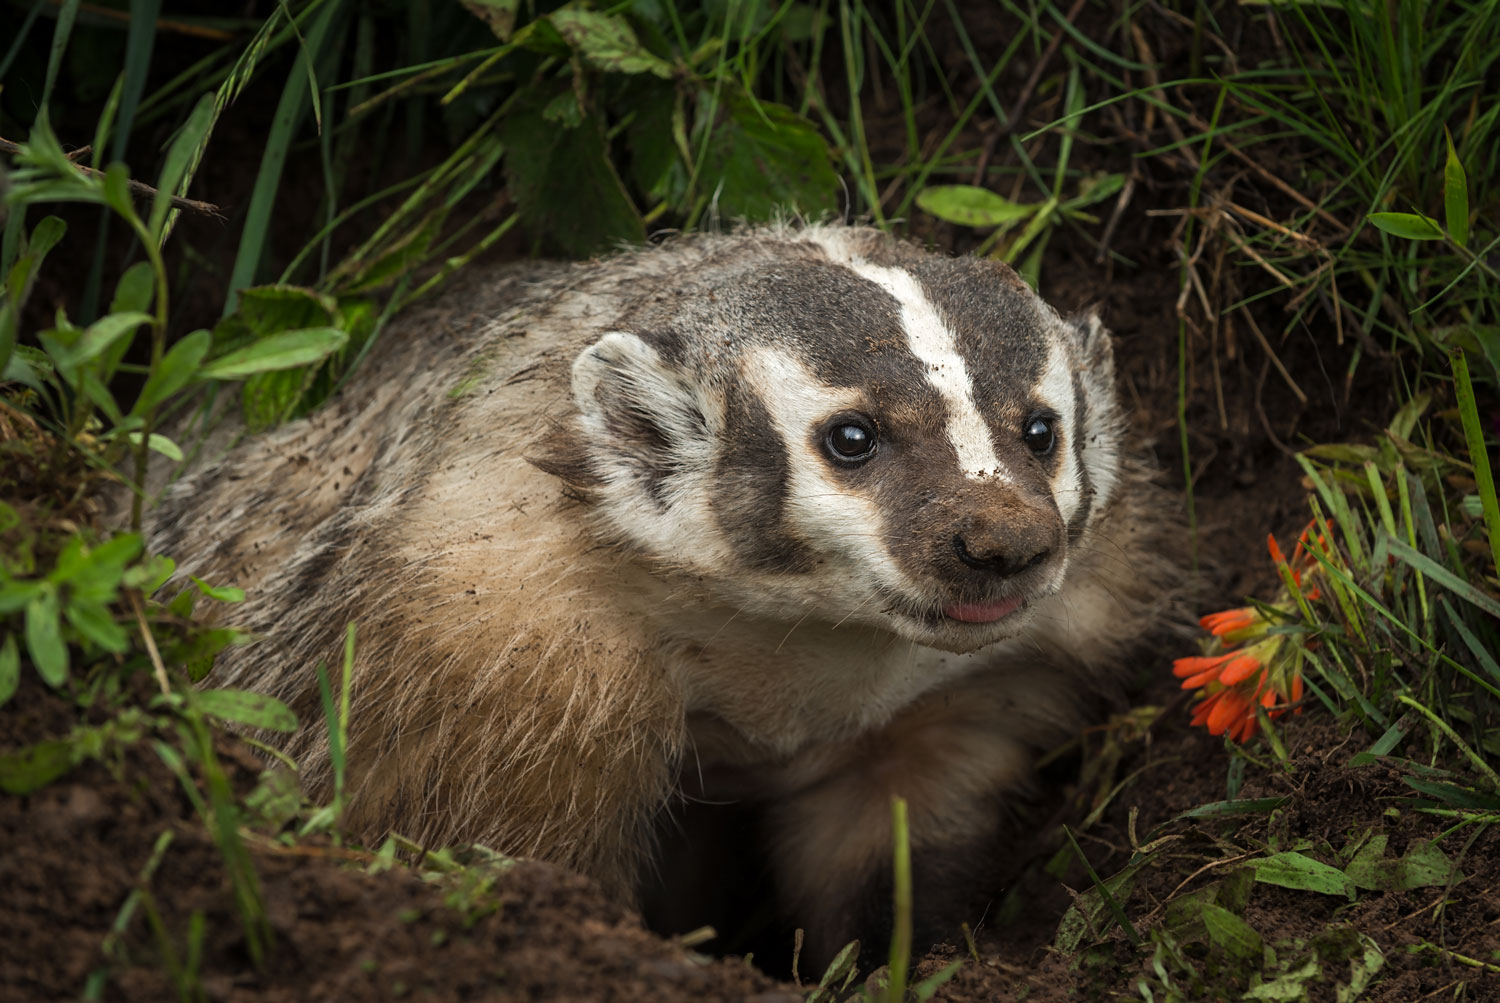 A badger on the forest floor